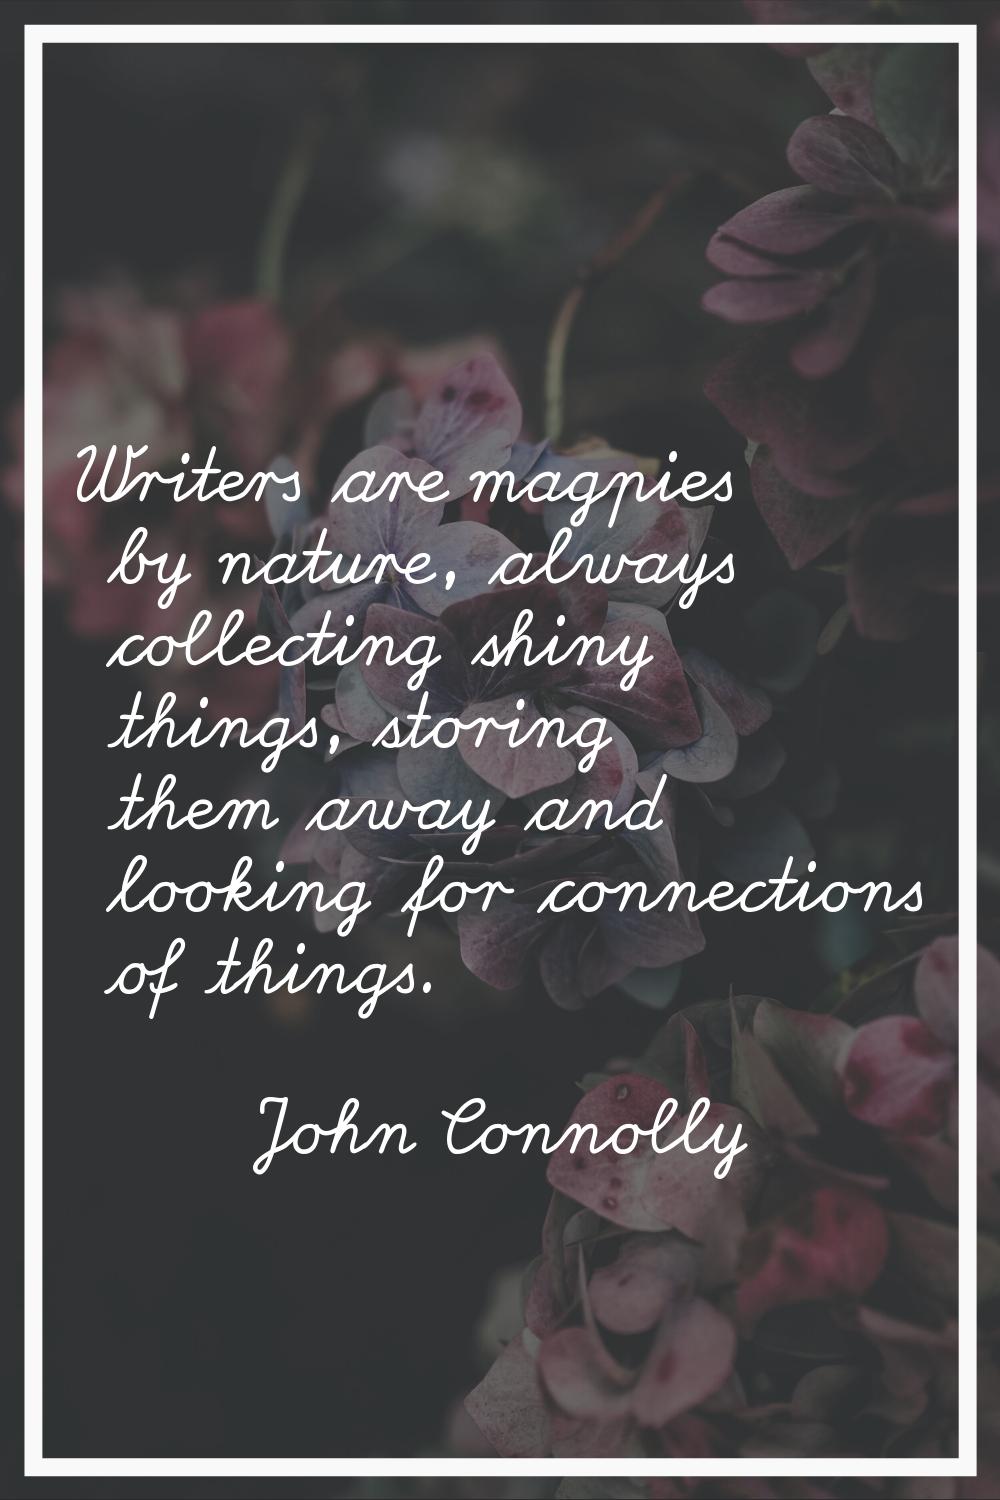 Writers are magpies by nature, always collecting shiny things, storing them away and looking for co